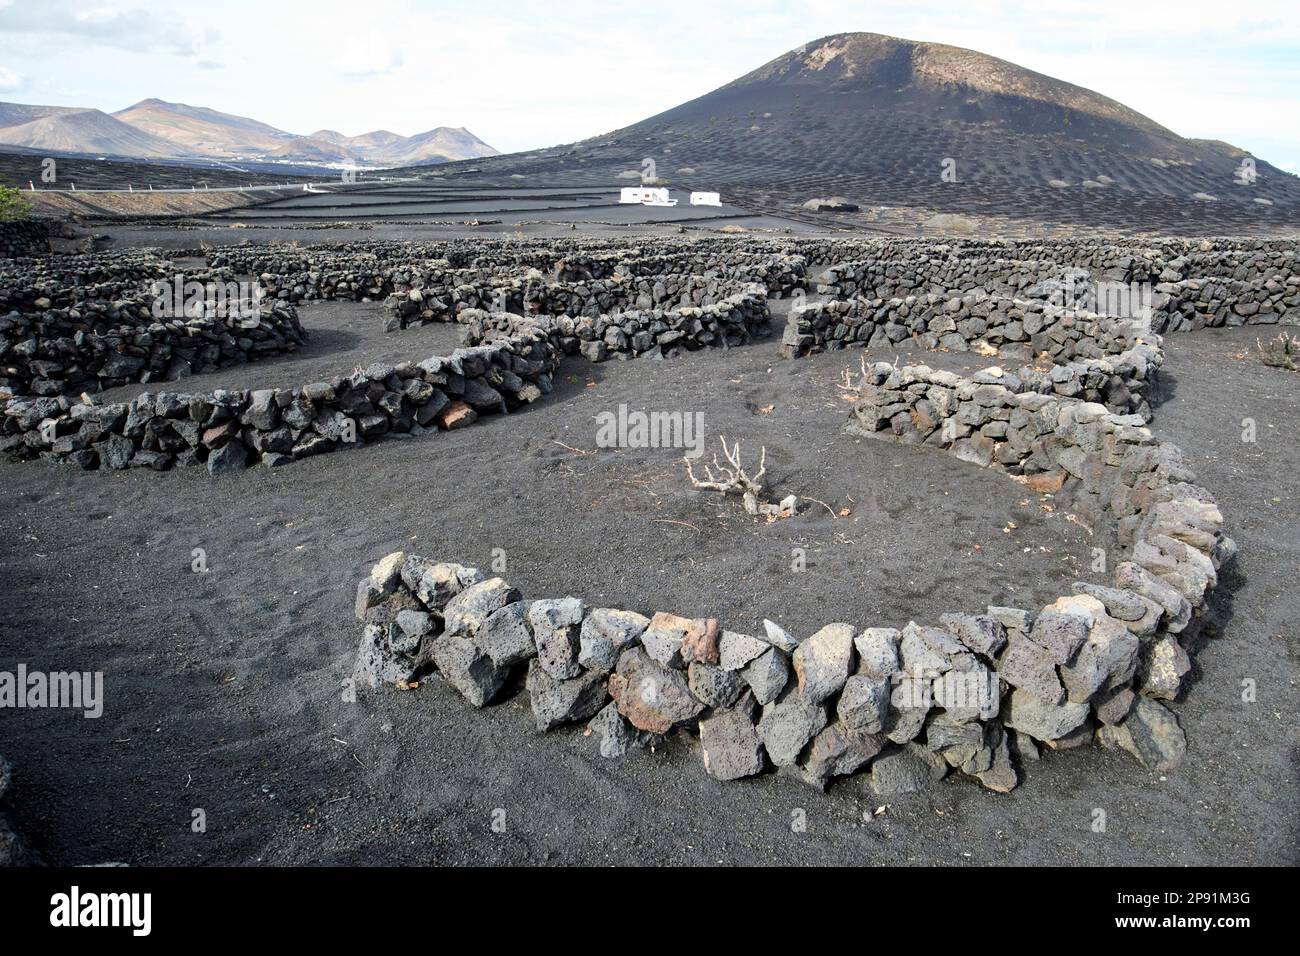 semicircular wind breaks made out of volcanic rock sheltering vines covered in picon ash in wine making region of la geria Lanzarote, Canary Islands, Stock Photo